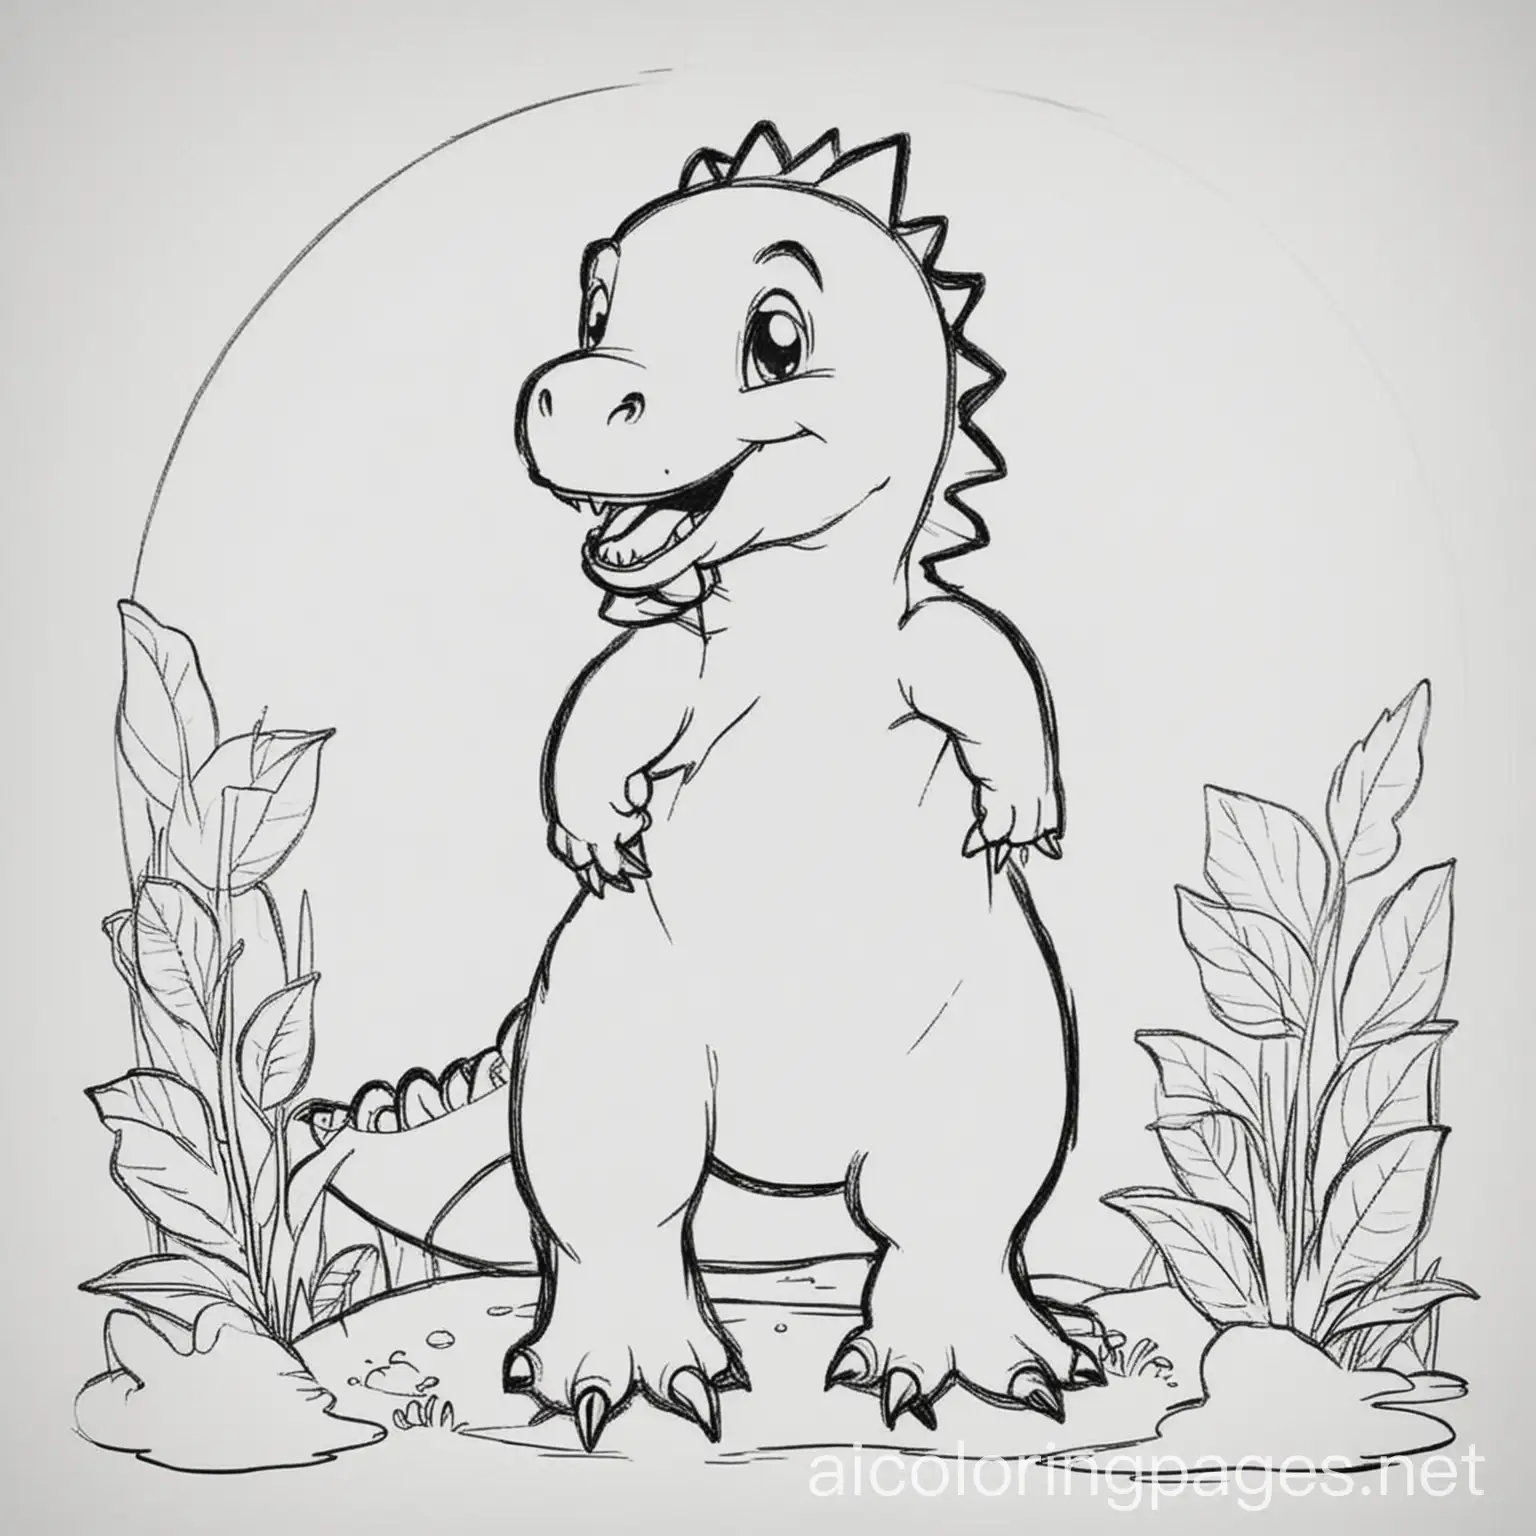 a cute dinosaur, Coloring Page, black and white, line art, white background, Simplicity, bold outline, no shading, Ample White Space. The background of the coloring page is plain white to make it easy for young children to color within the lines. The outlines of all the subjects are easy to distinguish, making it simple for kids to color without too much difficulty, Coloring Page, black and white, line art, white background, Simplicity, Ample White Space. The background of the coloring page is plain white to make it easy for young children to color within the lines. The outlines of all the subjects are easy to distinguish, making it simple for kids to color without too much difficulty, Coloring Page, black and white, line art, white background, Simplicity, Ample White Space. The background of the coloring page is plain white to make it easy for young children to color within the lines. The outlines of all the subjects are easy to distinguish, making it simple for kids to color without too much difficulty